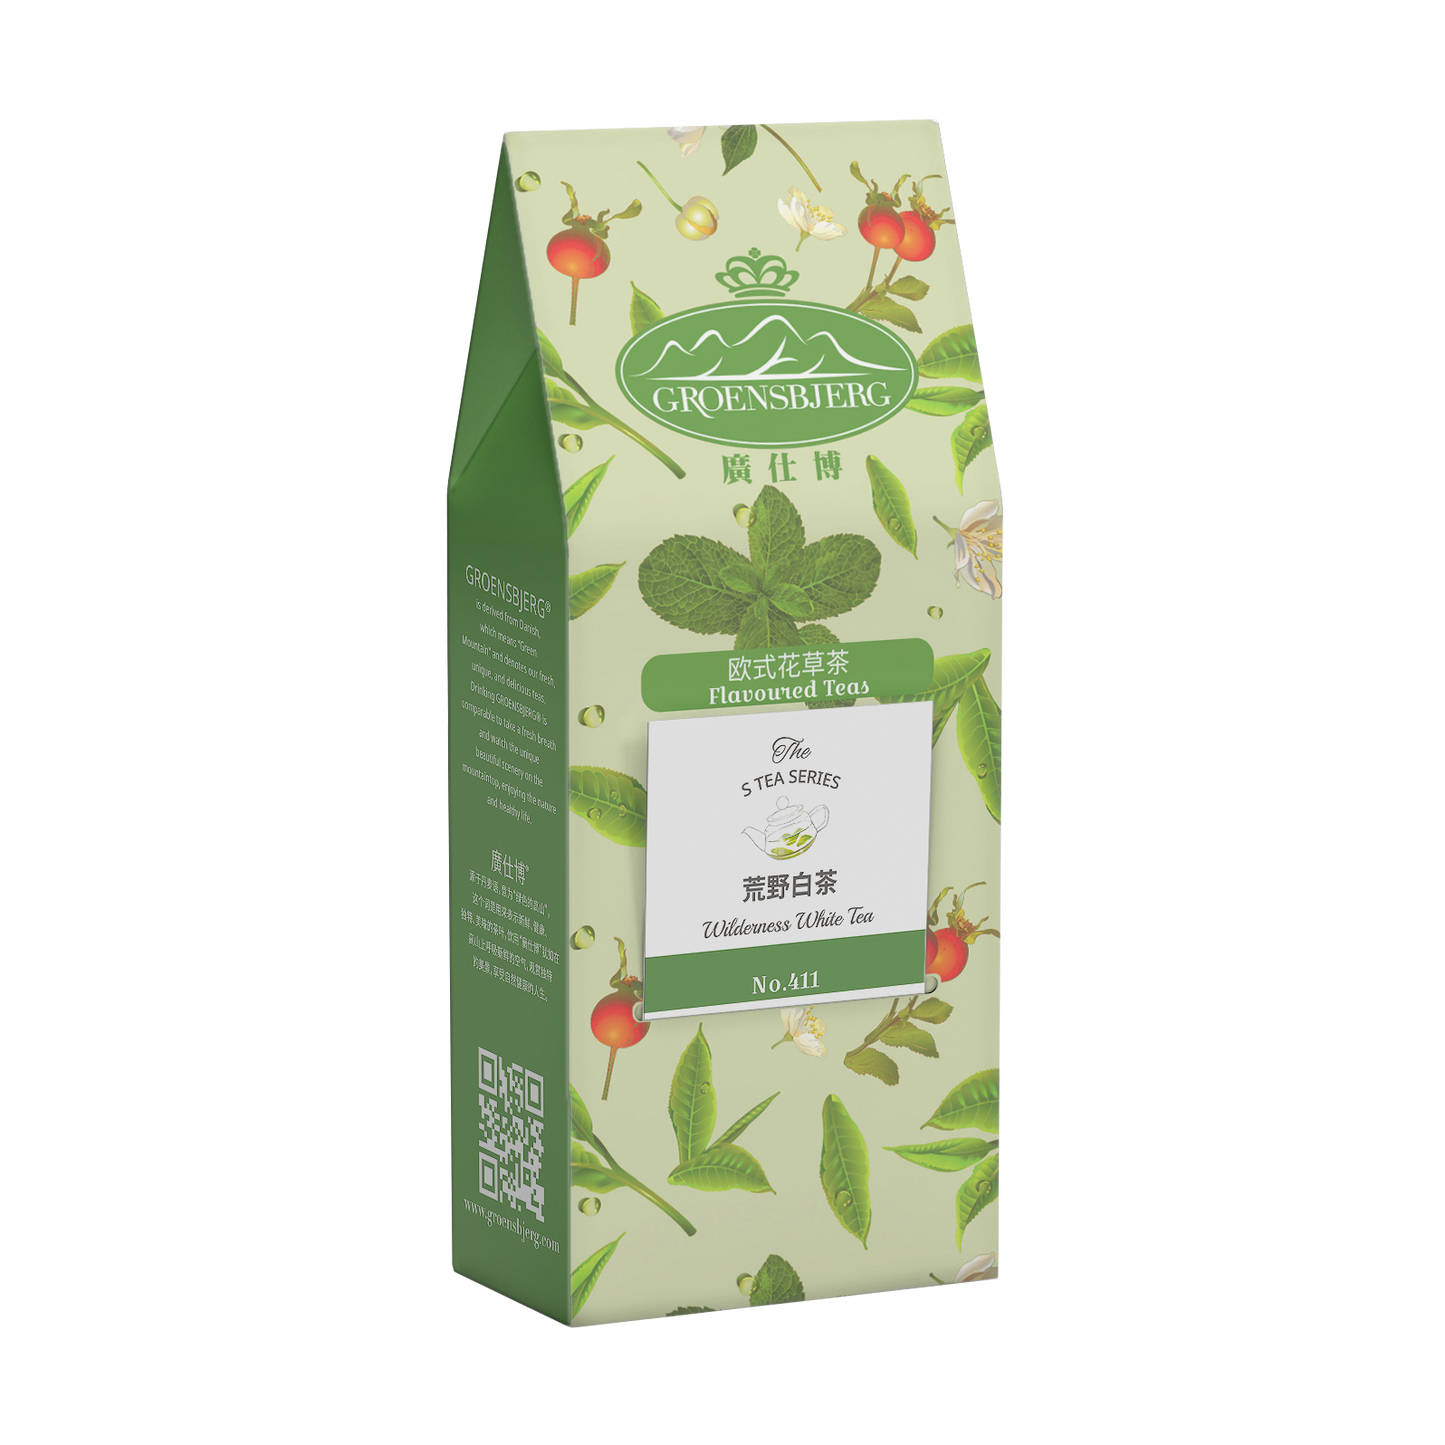 Wilderness White Tea 37.5g Pouch Box with Teabags